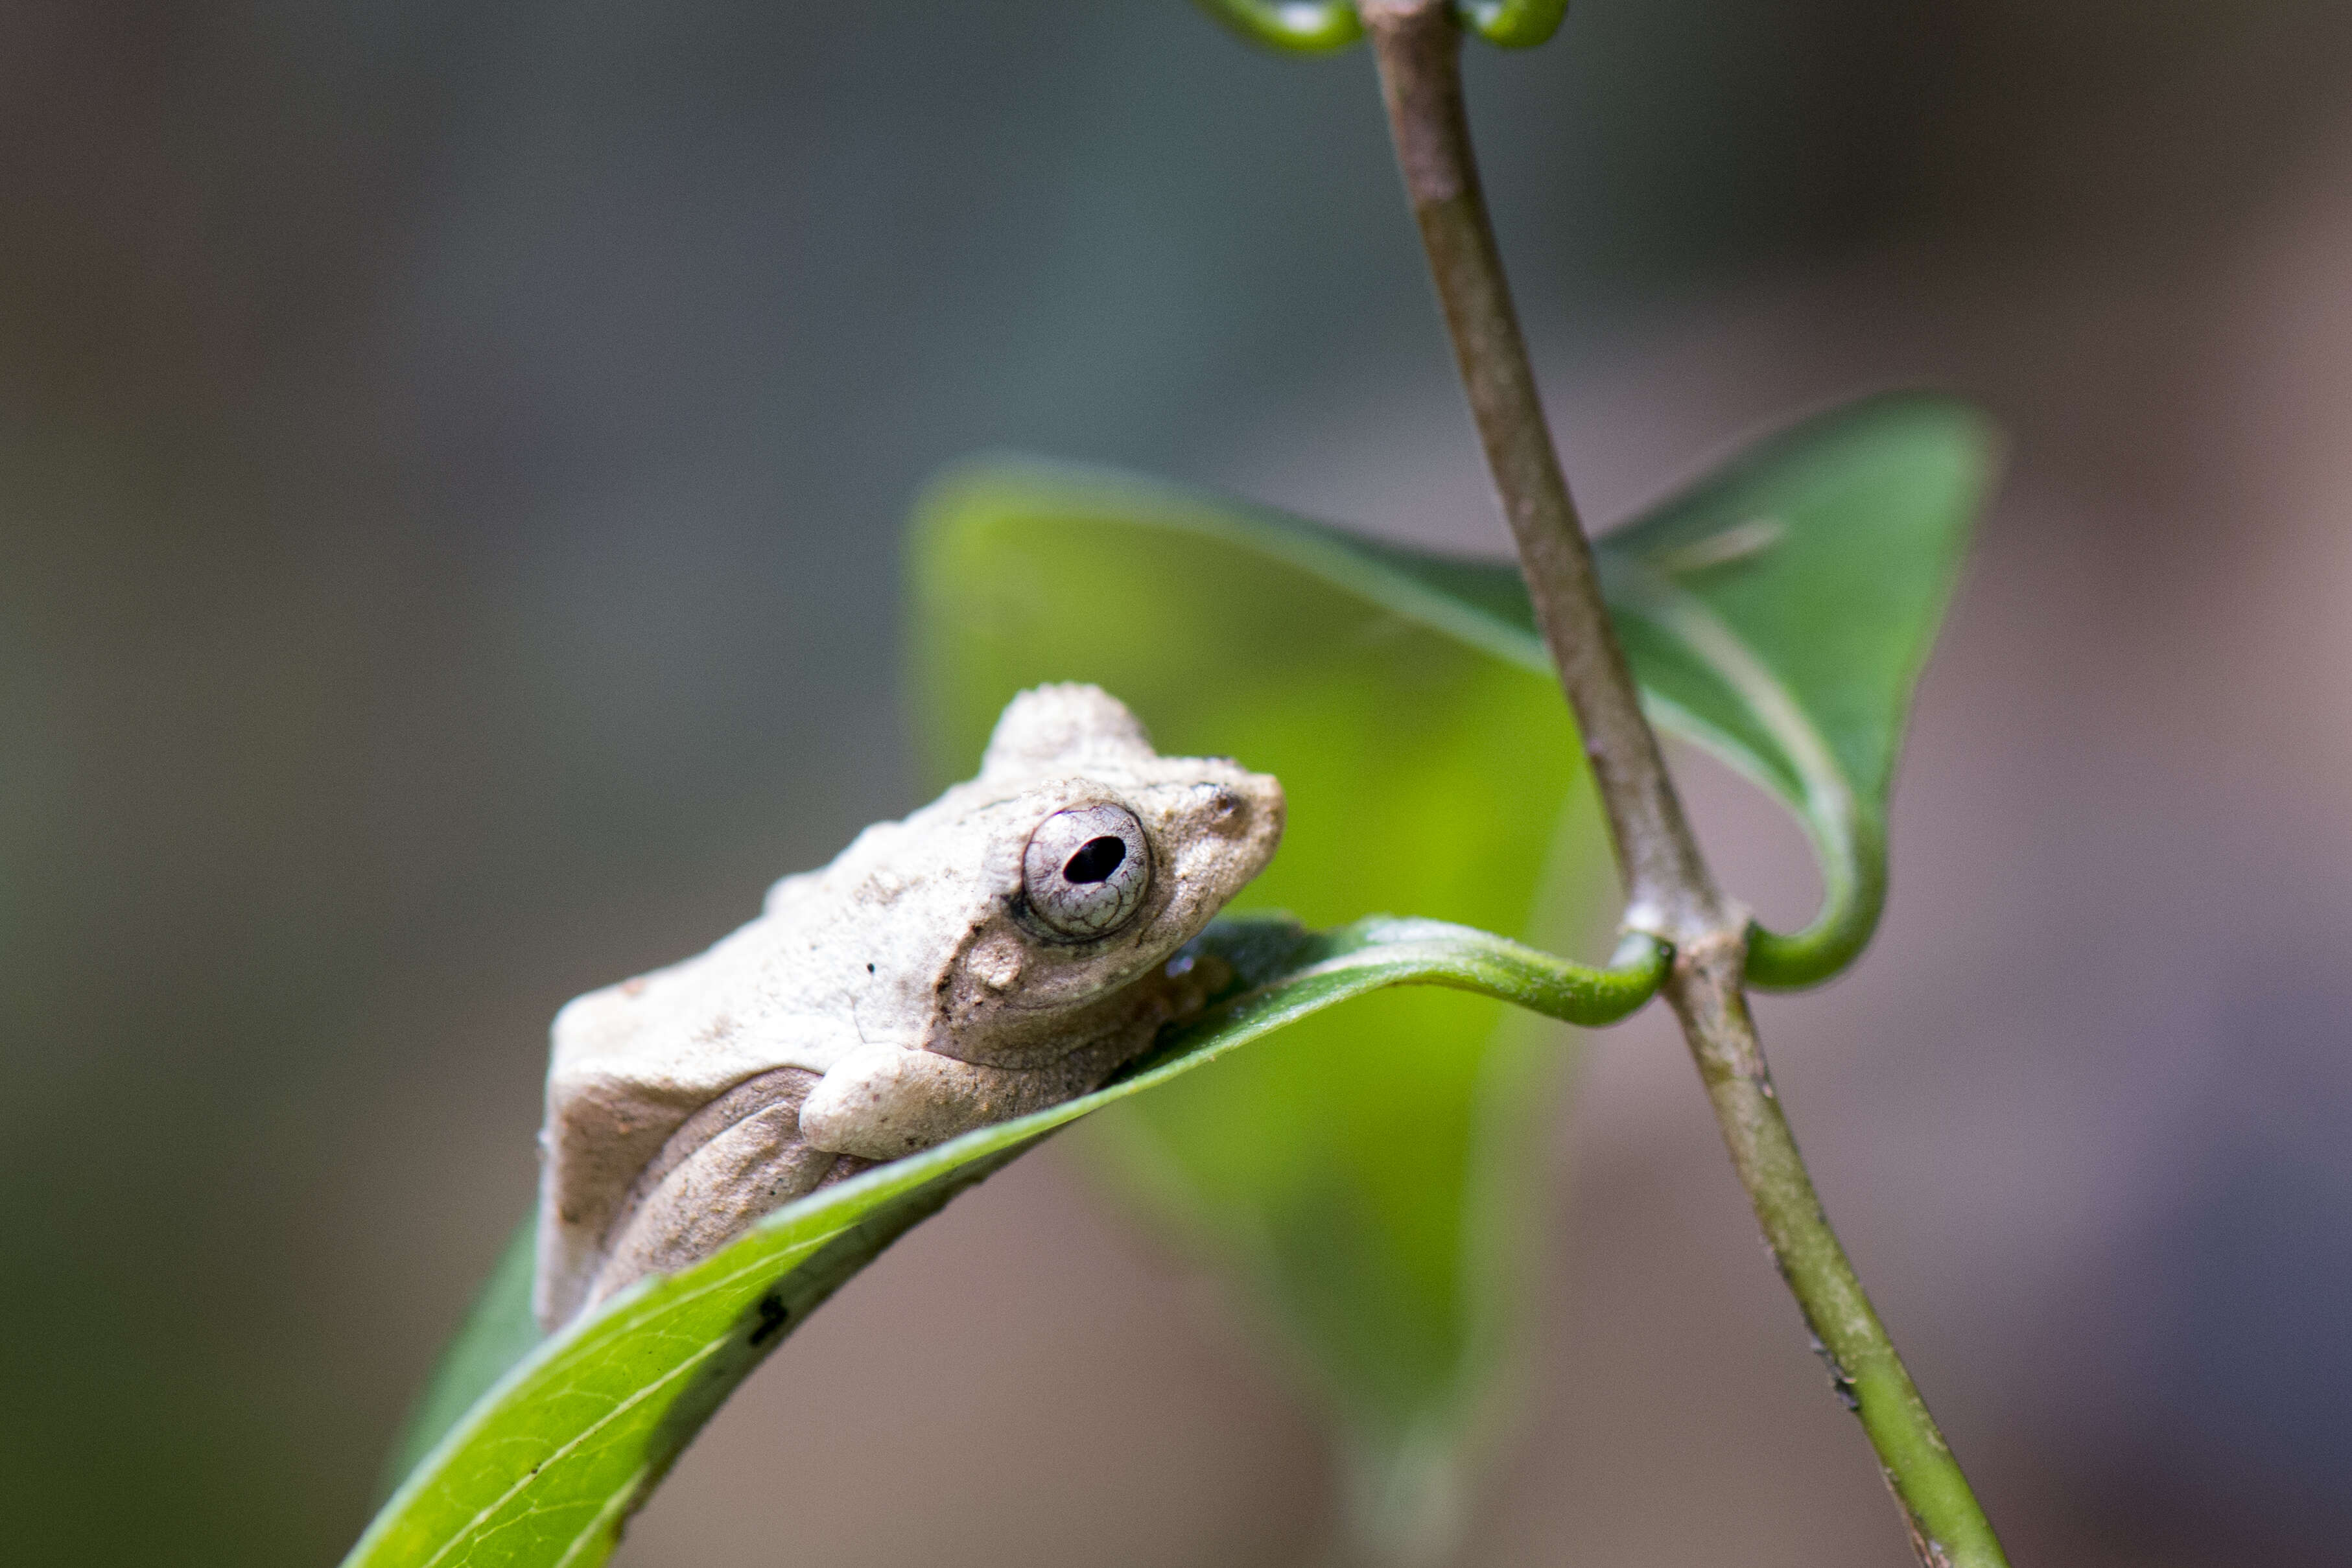 Image of Temple Tree Frog